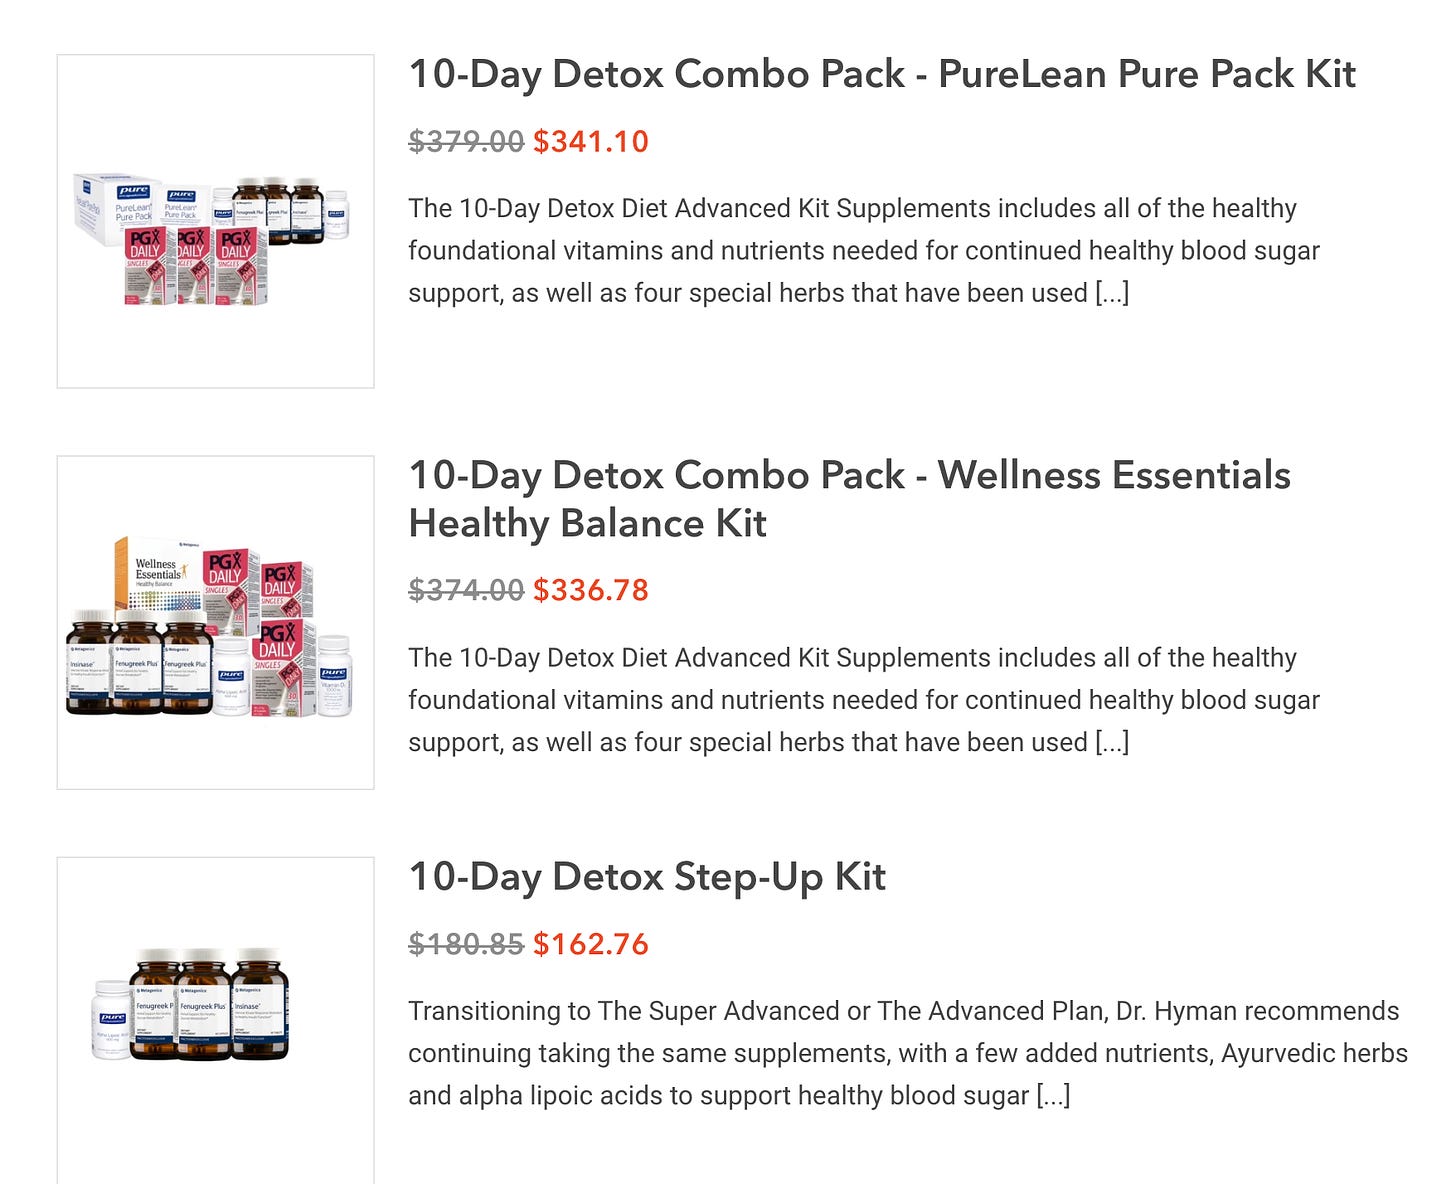 3 different products being sold by Dr. Mark Hyman purporting to detox you in 10 days with costs ranging between $162 and $341